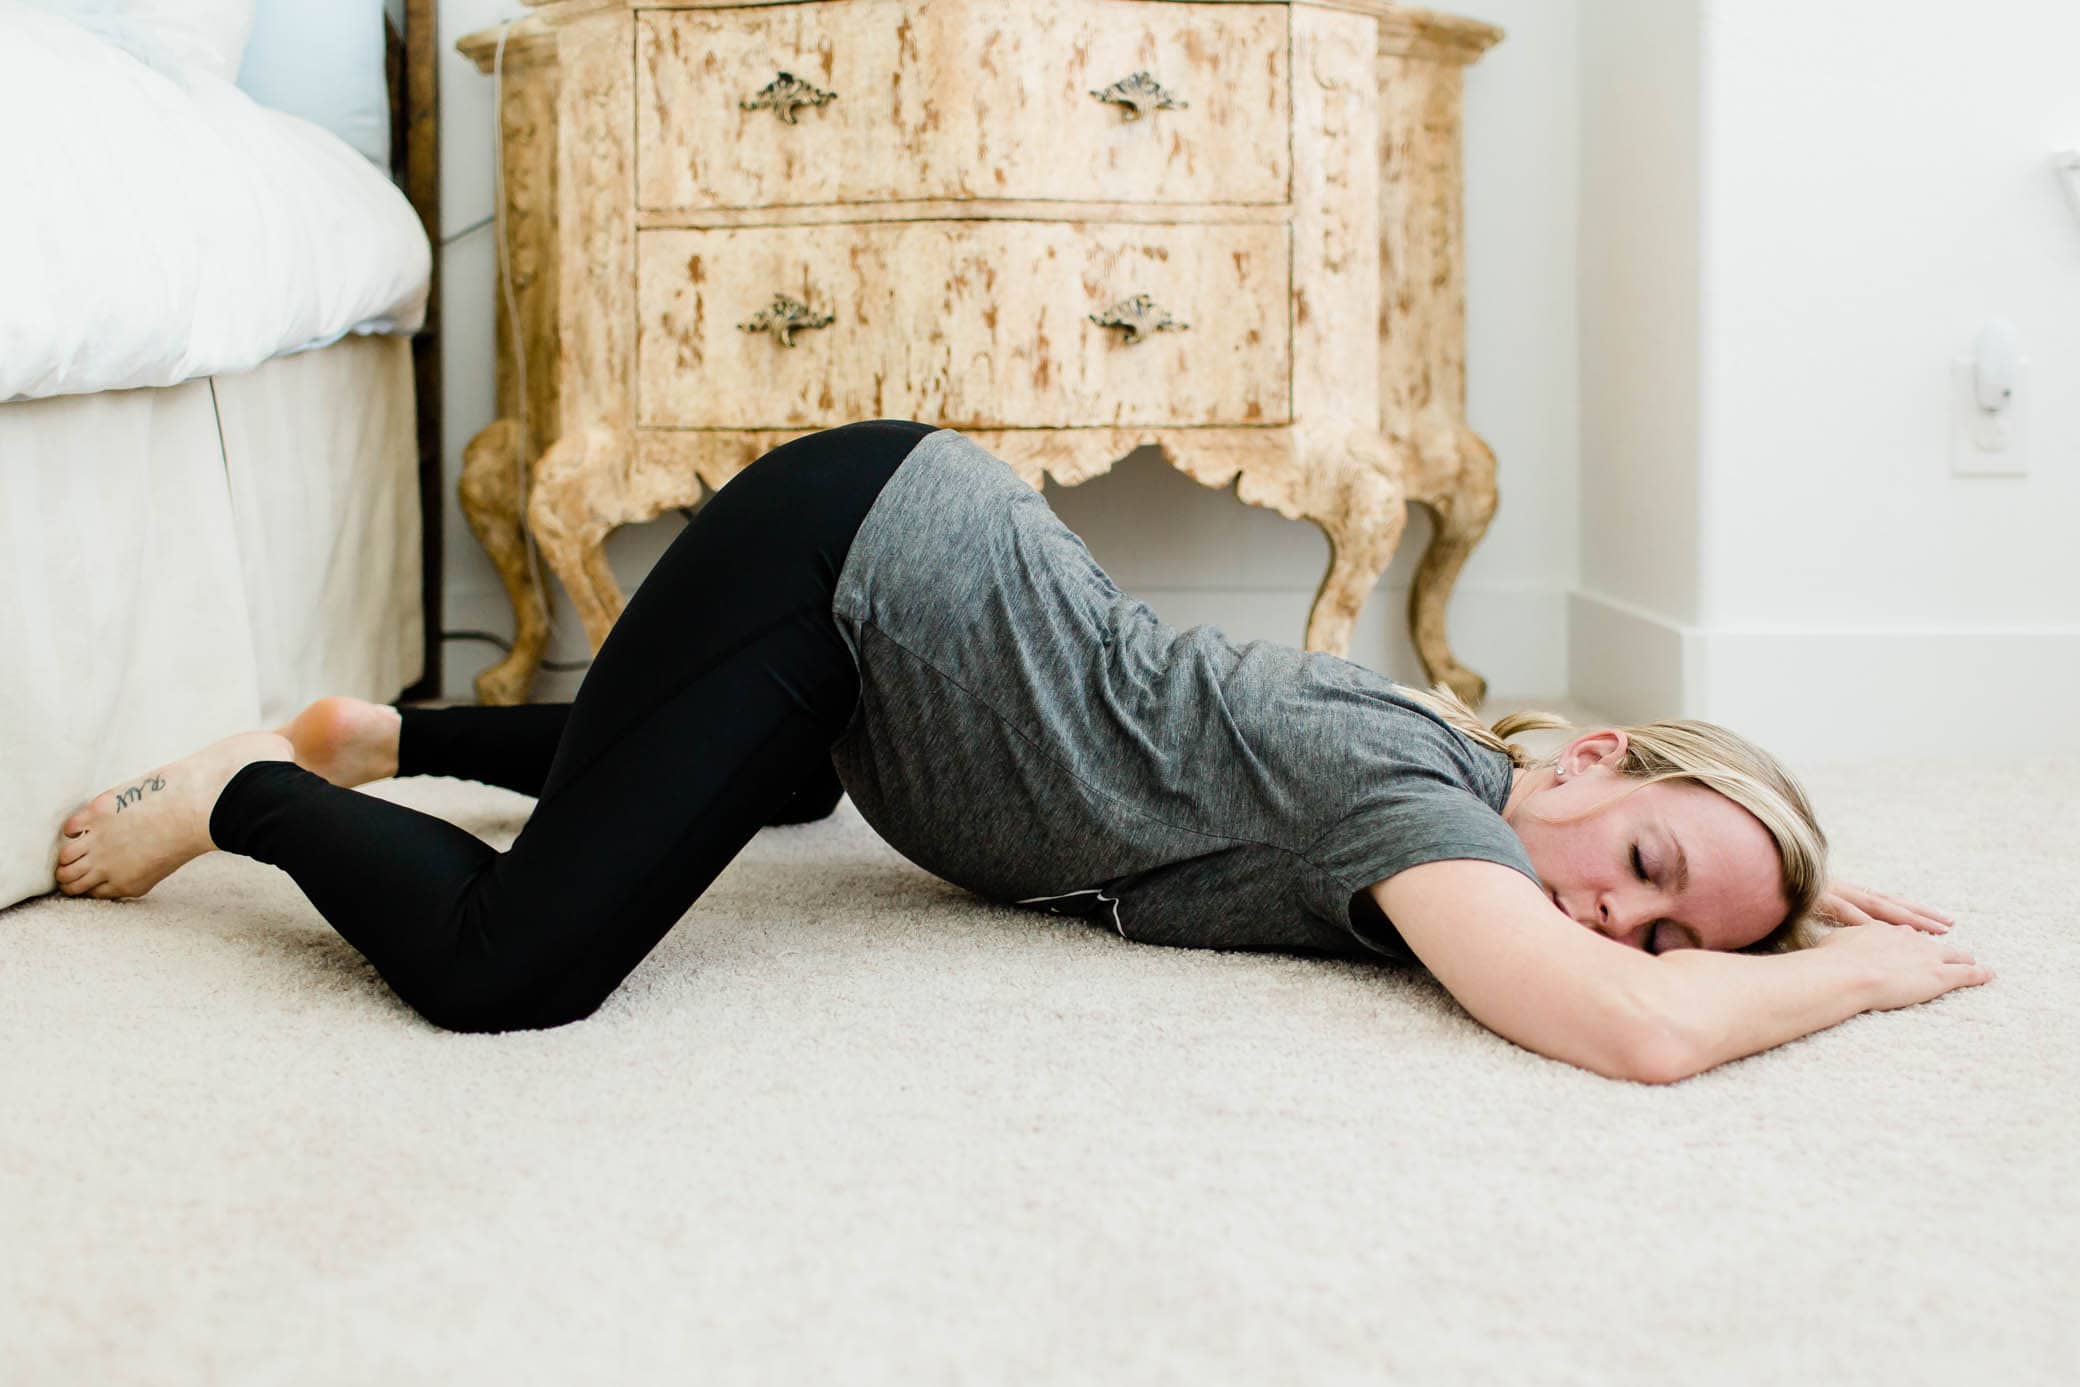 Pregnant woman doing open knee chest position on the floor.